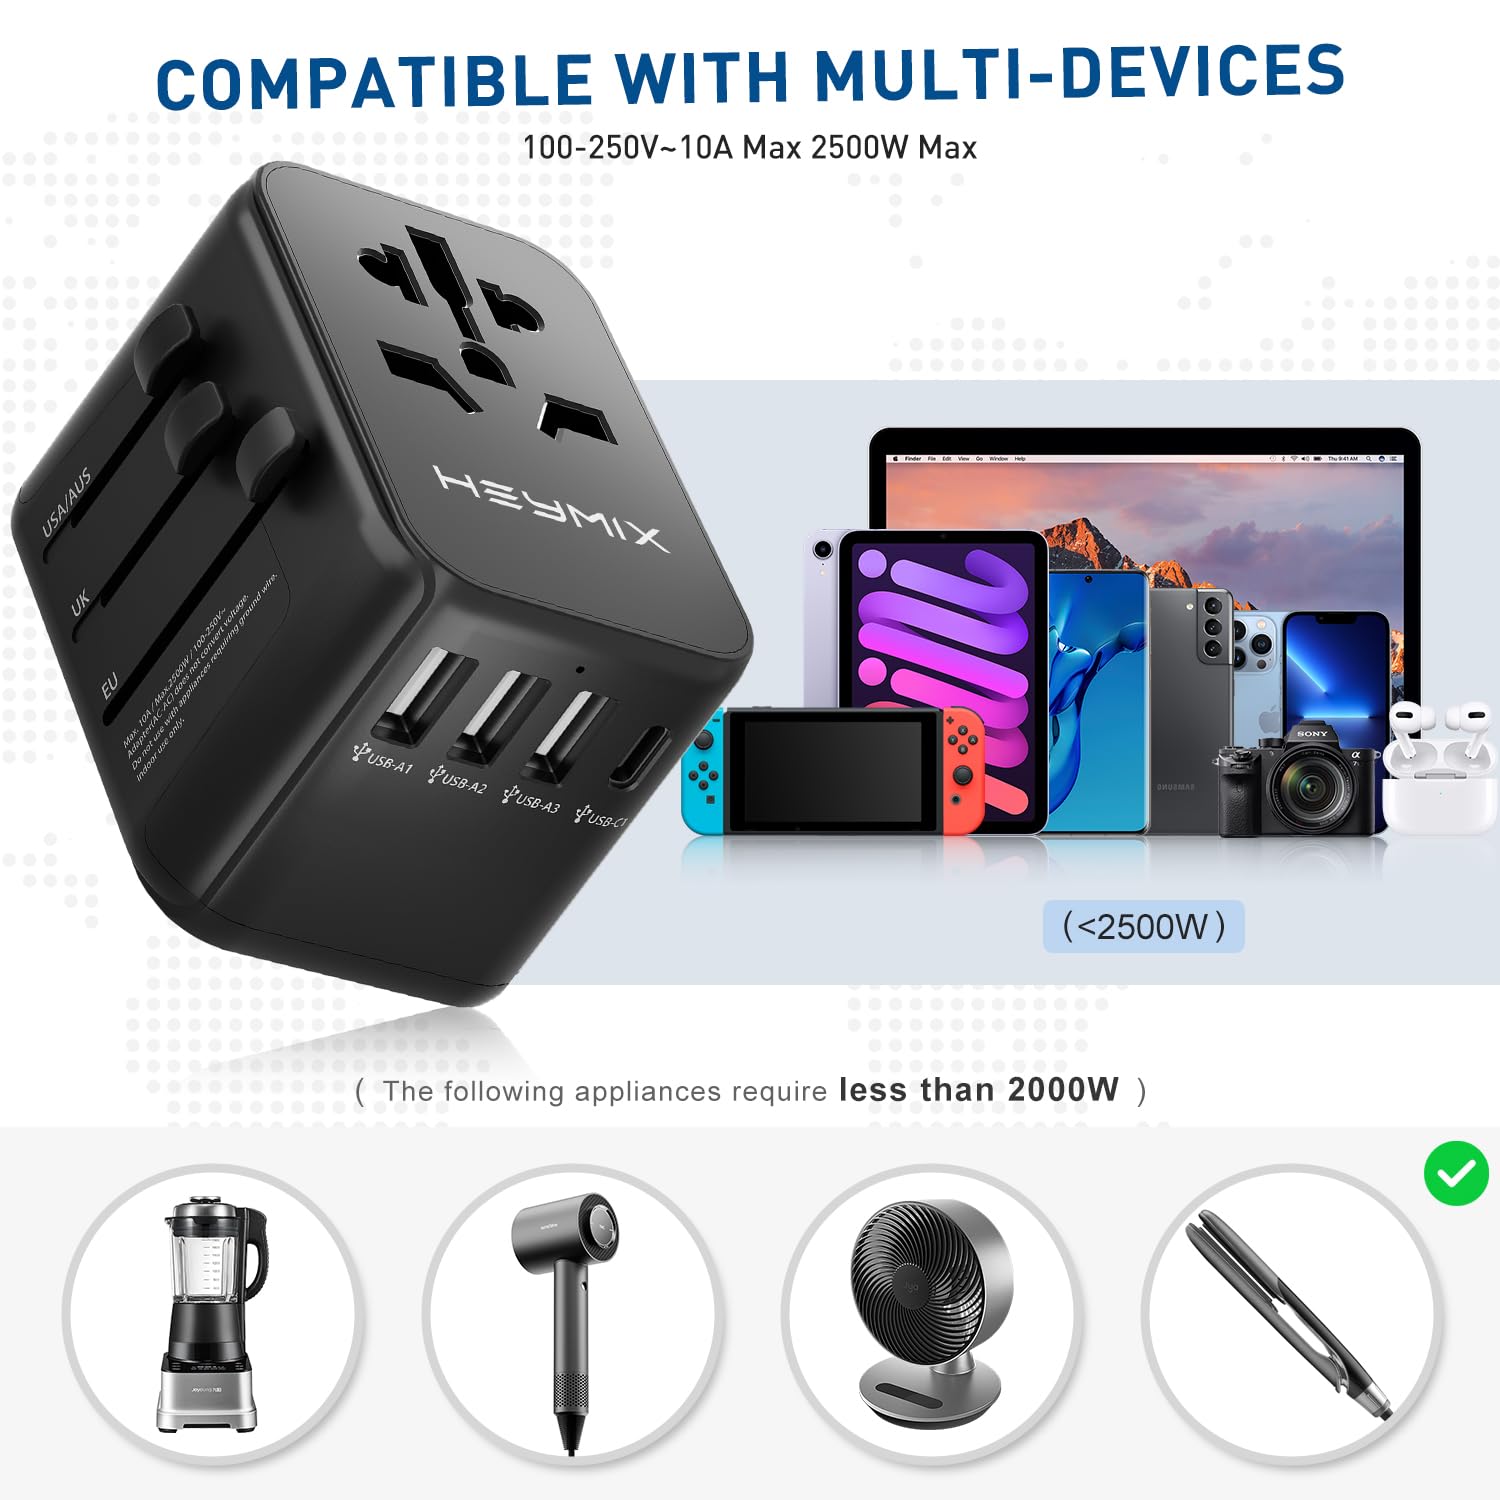 compatible with multi devices